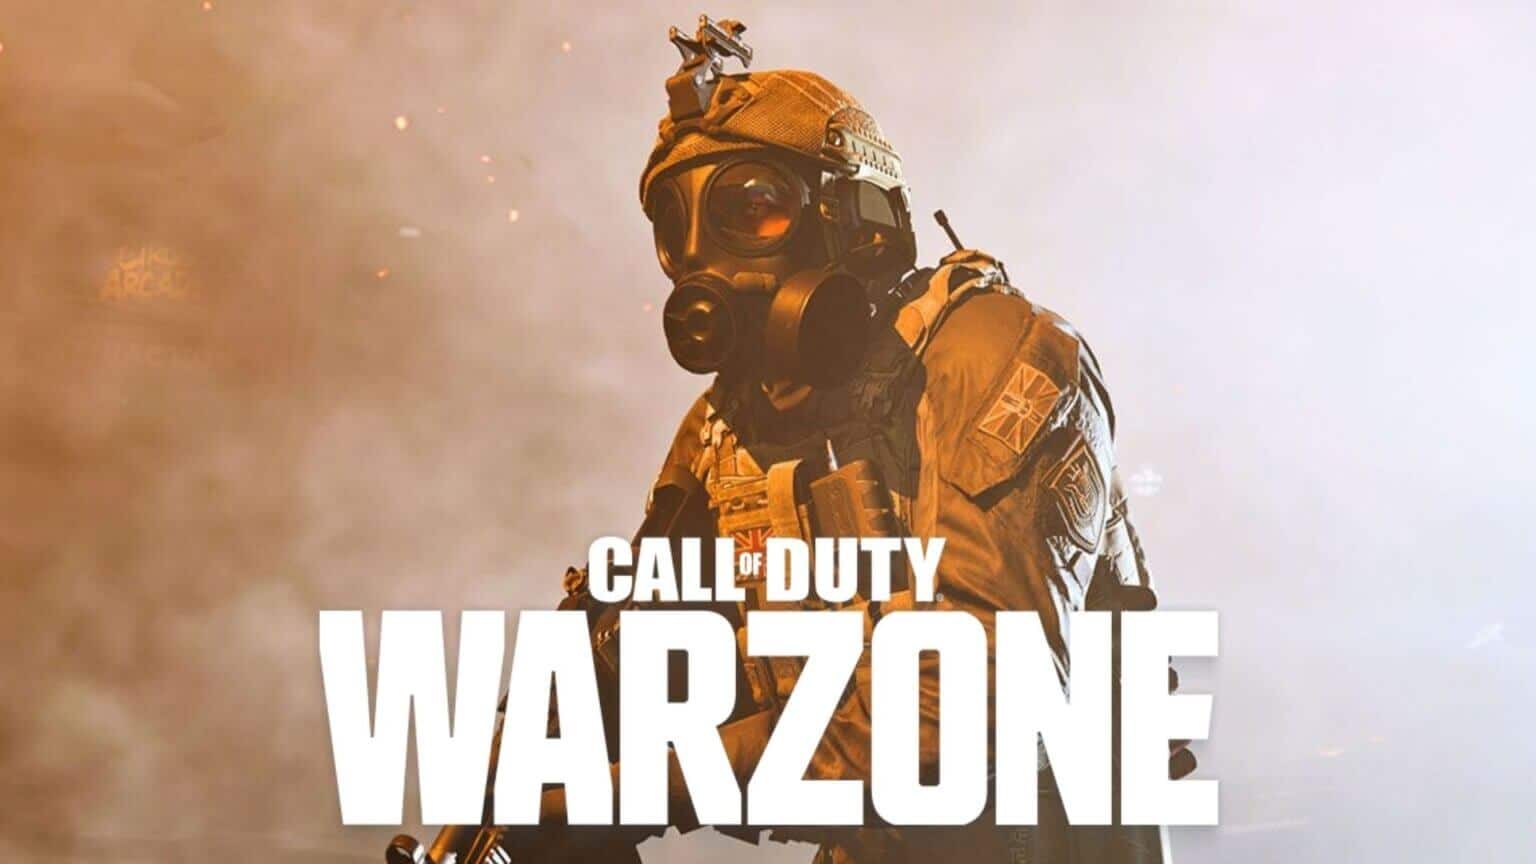 Warzone-players-call-for-changes-to-Gas-Mask-animation-1536x864